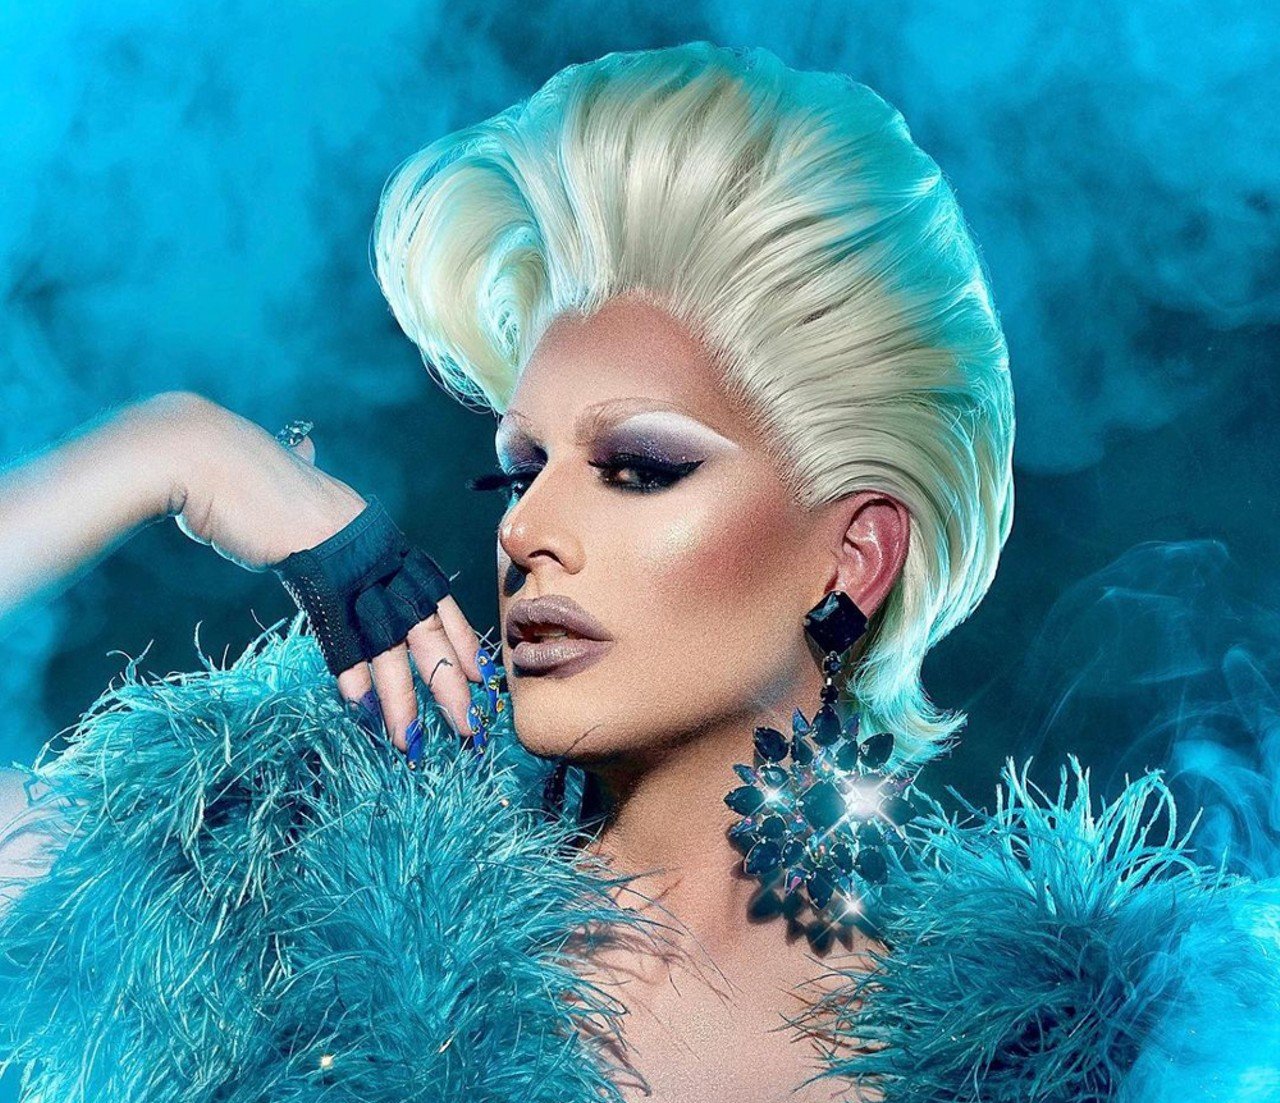  Dusty Ray Bottoms 
@dustyray  
Dusty Ray Bottoms might live in New York City now, but she hails from Louisville originally. (In fact, Dustin Rayburn left Kentucky because of their experiences with conversion therapy, for which they starred in a recent documentary, &#147;Conversion.&#148;)
Photo via dustyray/Instagram